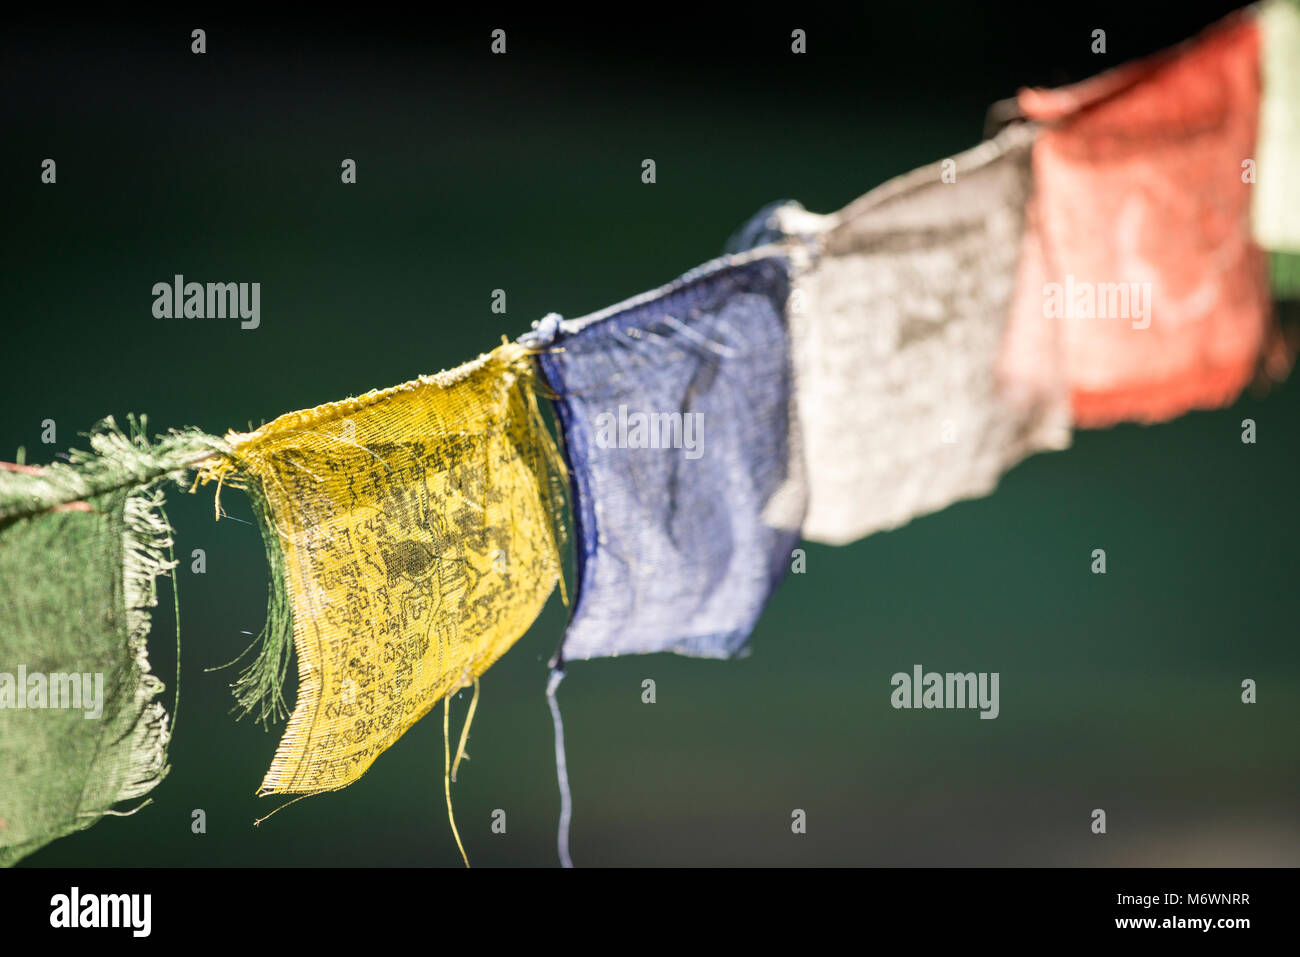 A detail of Tibetan prayer flags hanging outside at The Otter Bar Lodge and Kayak School in Forks of Salmon, California. Stock Photo